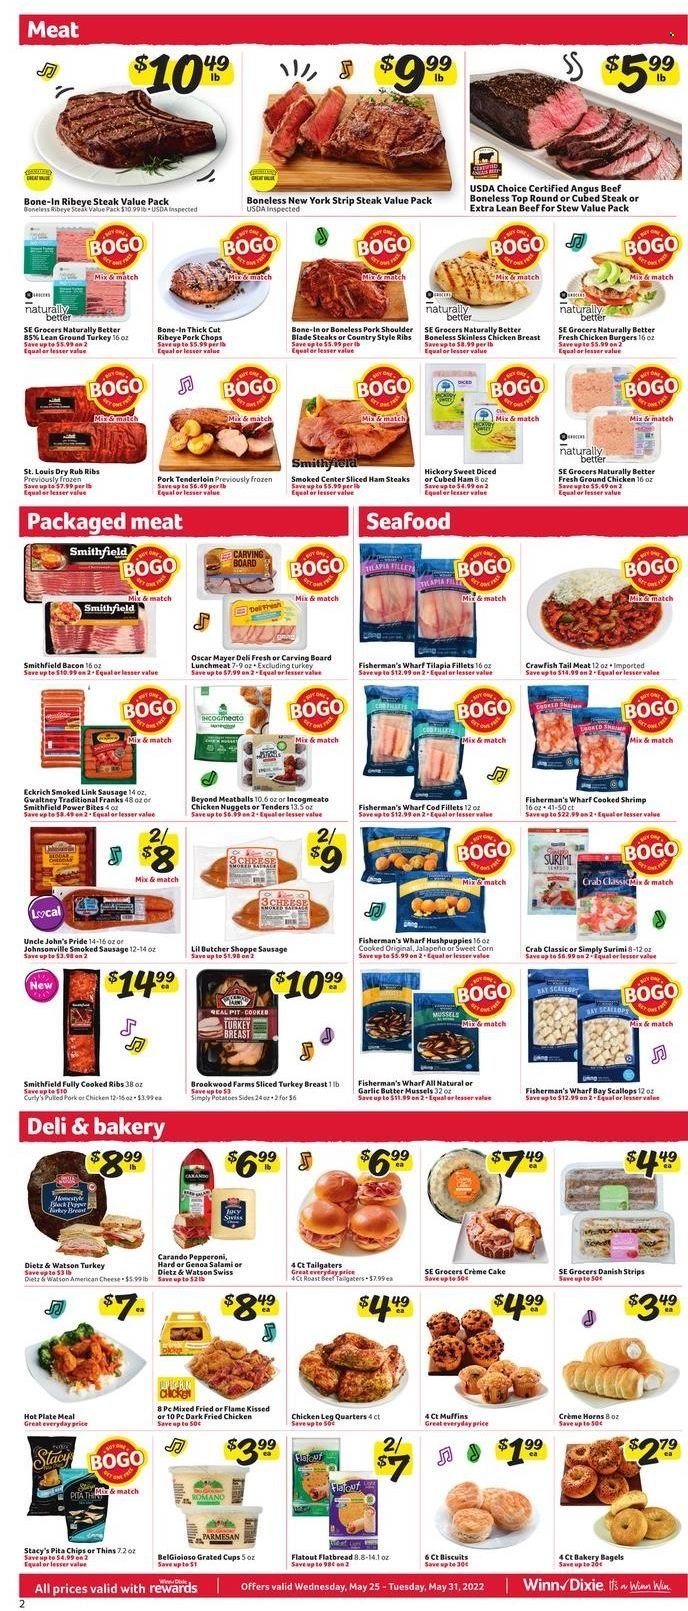 thumbnail - Winn Dixie Flyer - 05/25/2022 - 05/31/2022 - Sales products - bagels, cake, flatbread, cream pie, muffin, corn, potatoes, jalapeño, sweet corn, cod, mussels, scallops, tilapia, seafood, crab, shrimps, meatballs, nuggets, hamburger, fried chicken, chicken nuggets, pulled pork, bacon, salami, sliced turkey, ham, Johnsonville, Oscar Mayer, Dietz & Watson, sausage, smoked sausage, pepperoni, lunch meat, ham steaks, american cheese, parmesan, cheese, butter, crawfish, strips, biscuit, Thins, pita chips, ground chicken, turkey breast, chicken legs, beef meat, beef steak, steak, roast beef, bone-in ribeye, ribeye steak, striploin steak, pork chops, pork meat, pork ribs, pork shoulder, pork tenderloin, country style ribs, plate, cup. Page 2.